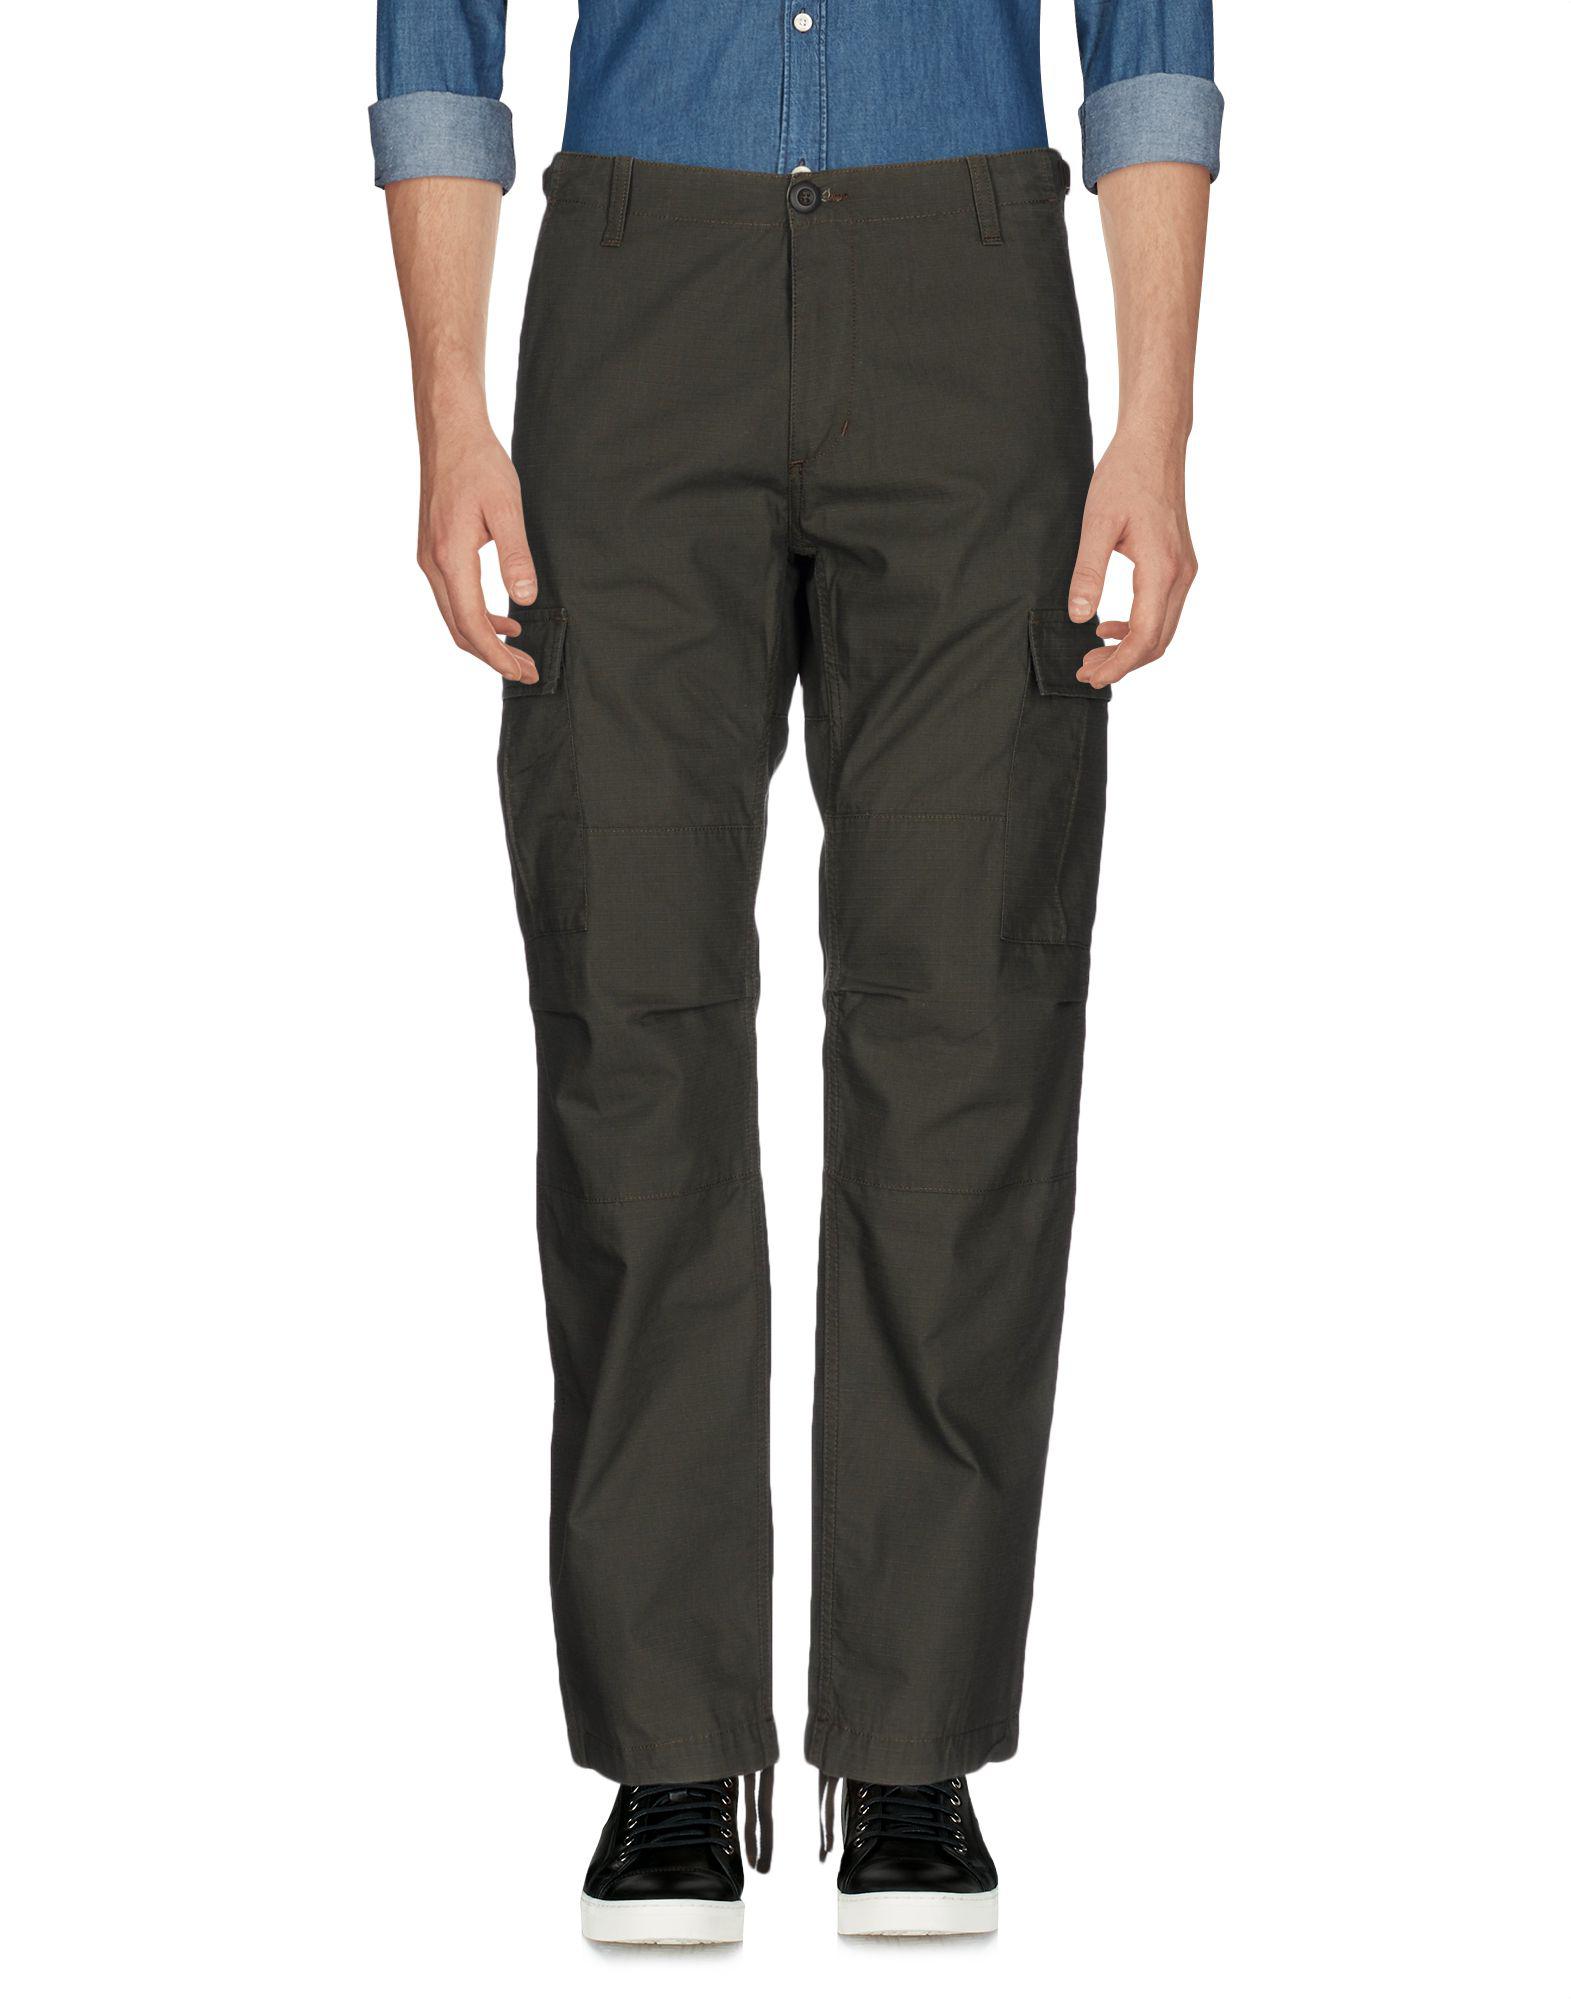 Carhartt Cotton Casual Pants in Military Green (Green) for Men - Lyst